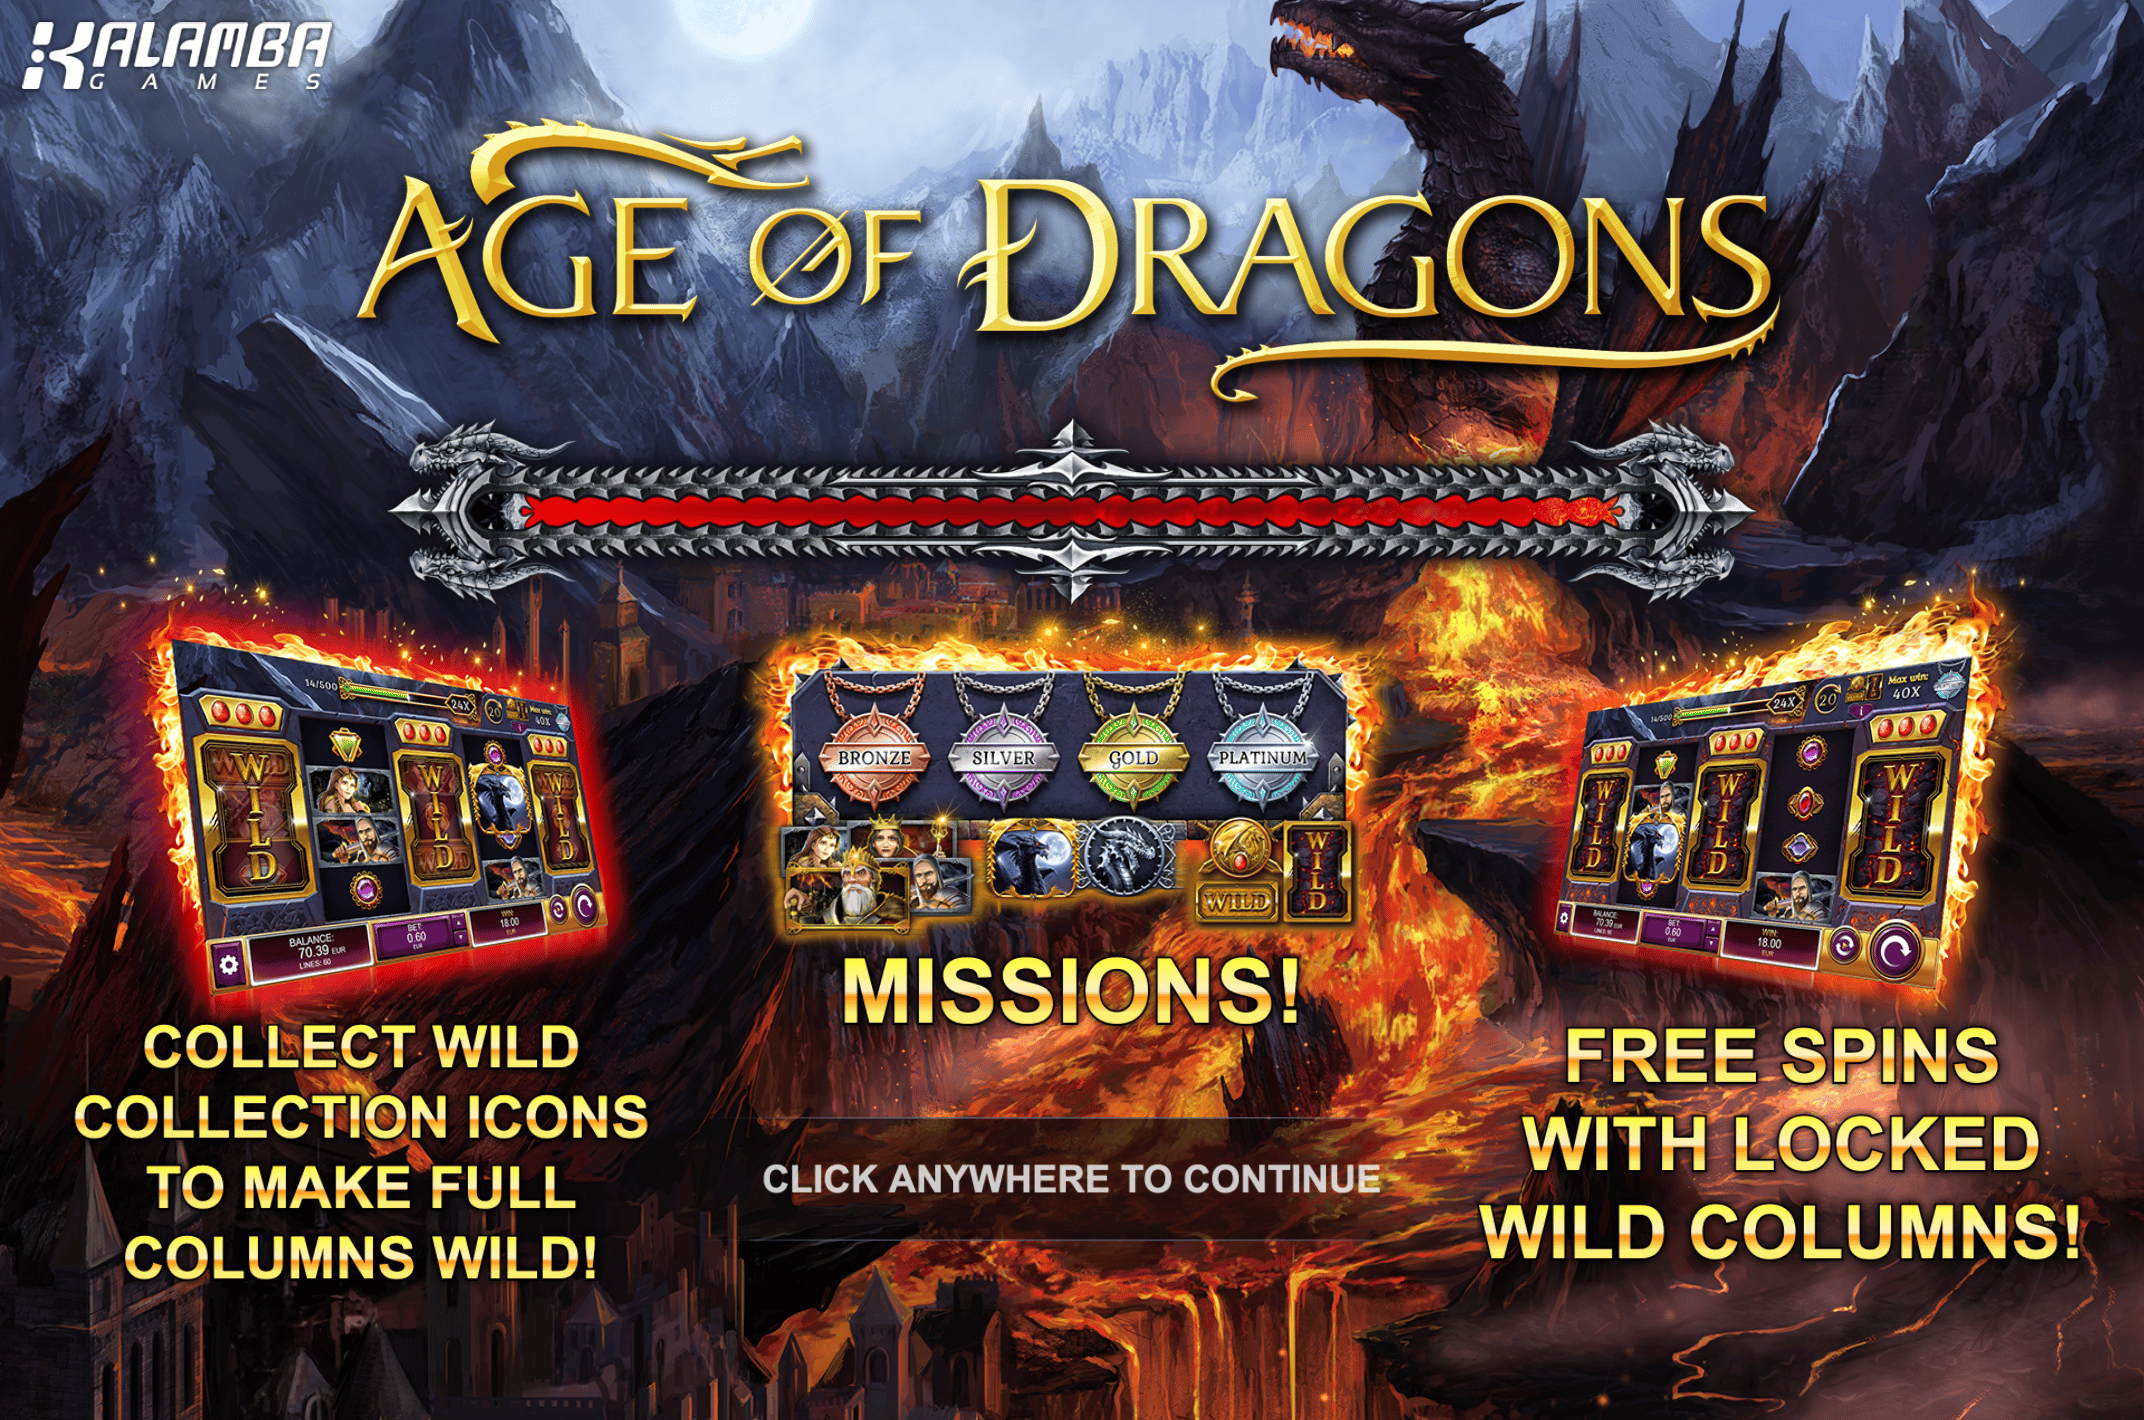 Age of Dragons features